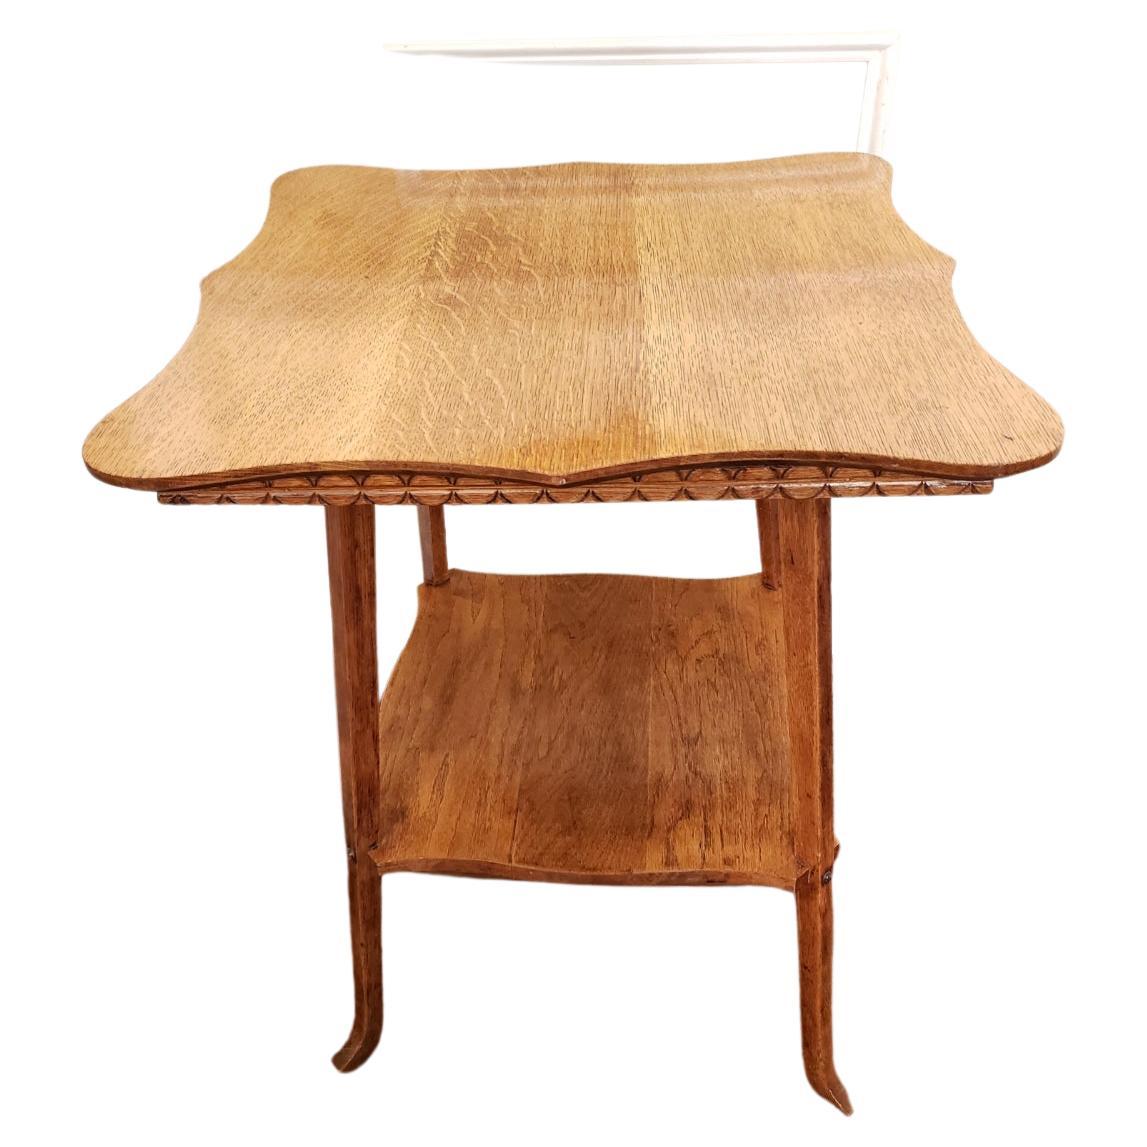 This late 19th century 2 tier table includes a large table top of 23.5